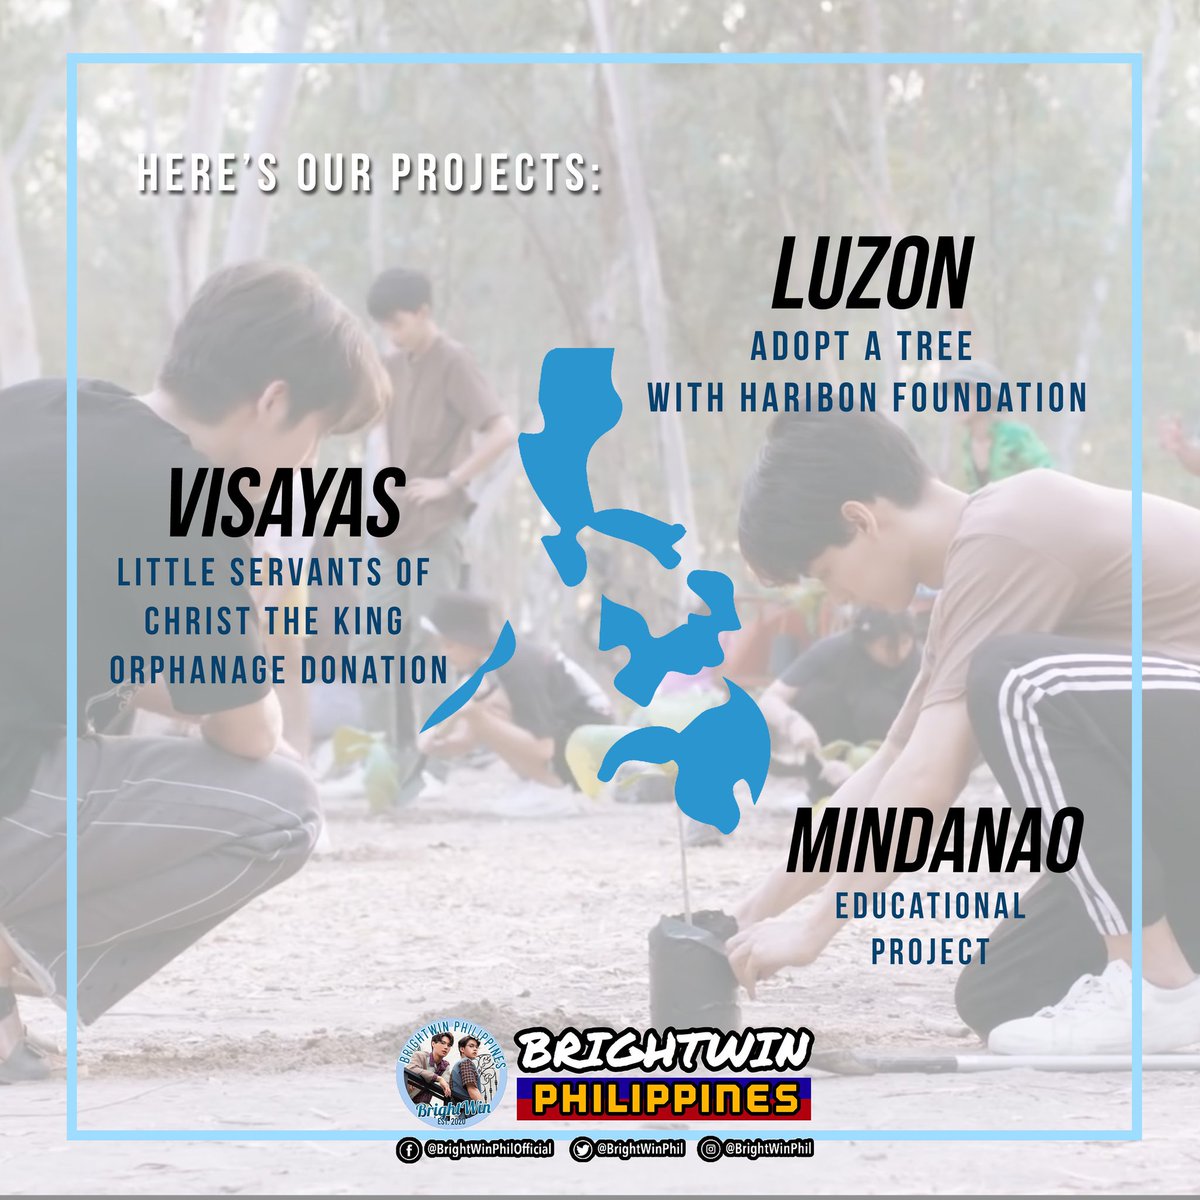 After confirming our chosen charities last July, we present to you our THREE MAJOR PROJECTS! LUZON - Adopt a tree (Named after Bright and Win)VISAYAS - Christ The King OrphanageMINDANAO - Educational Support @bbrightvc  @winmetawin  #BrightWinPhilGivesBack